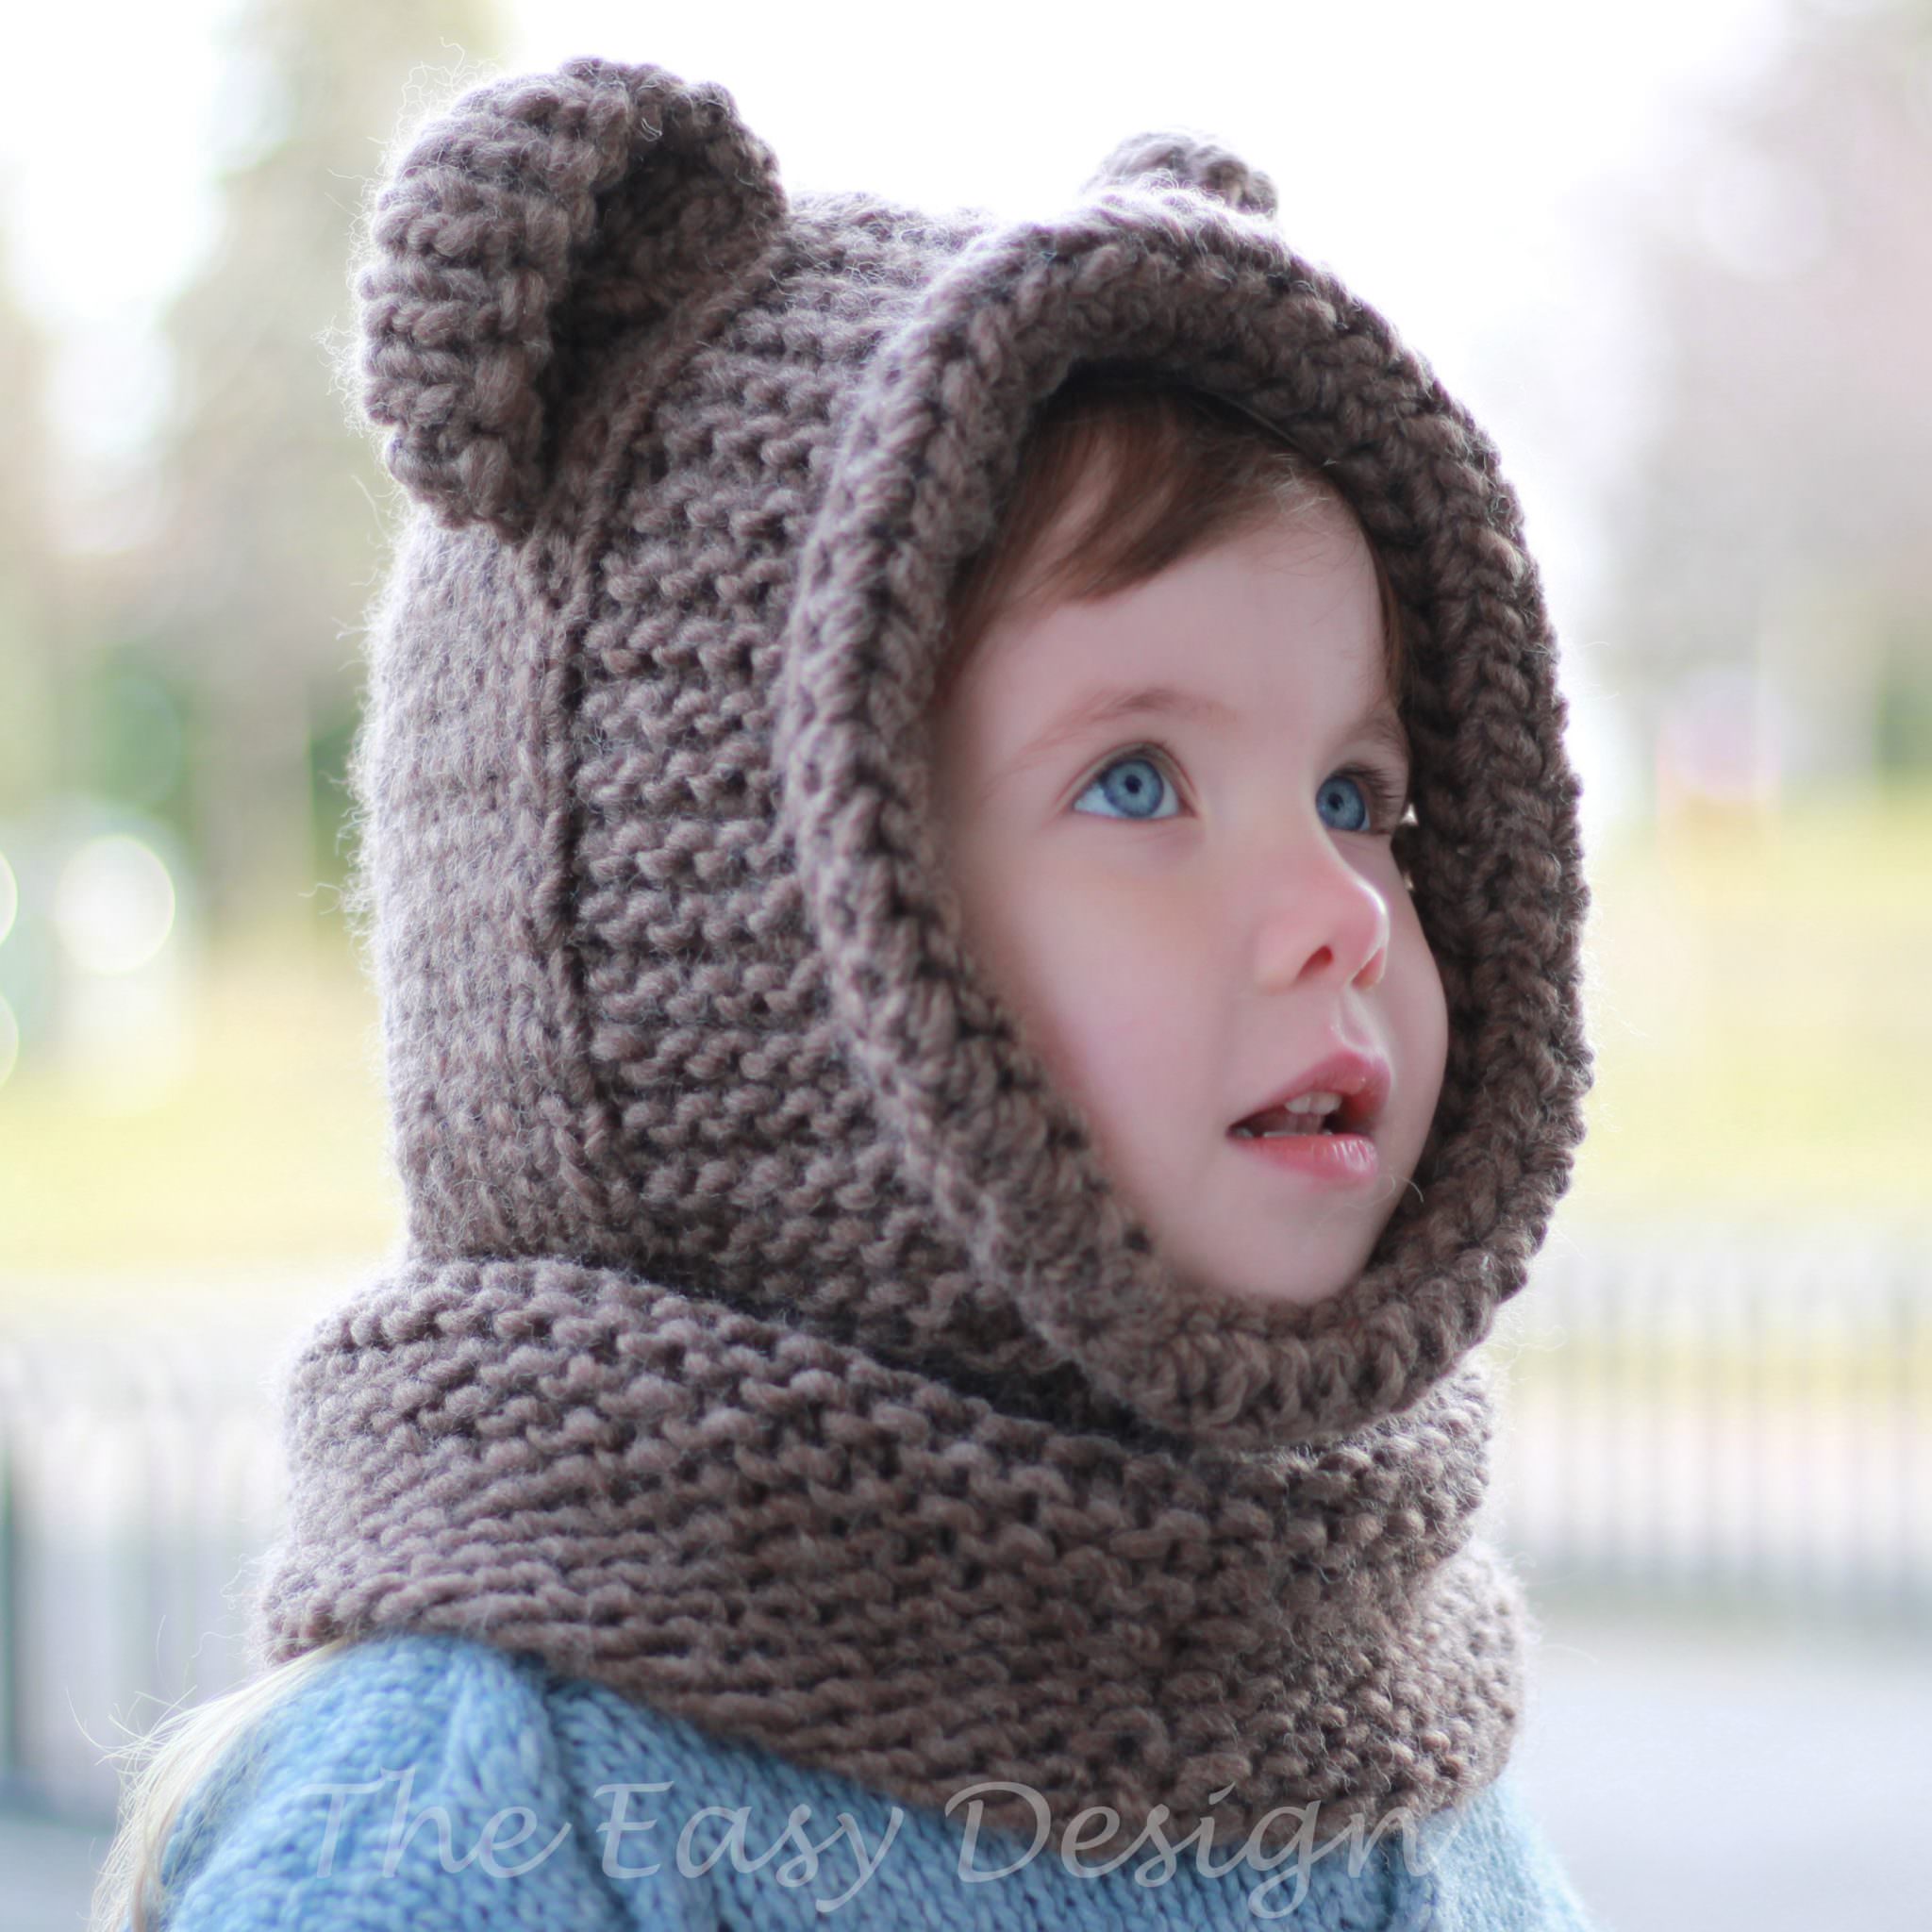 Brian Bear / Hooded cowl - Knitting pattern - The Easy Design